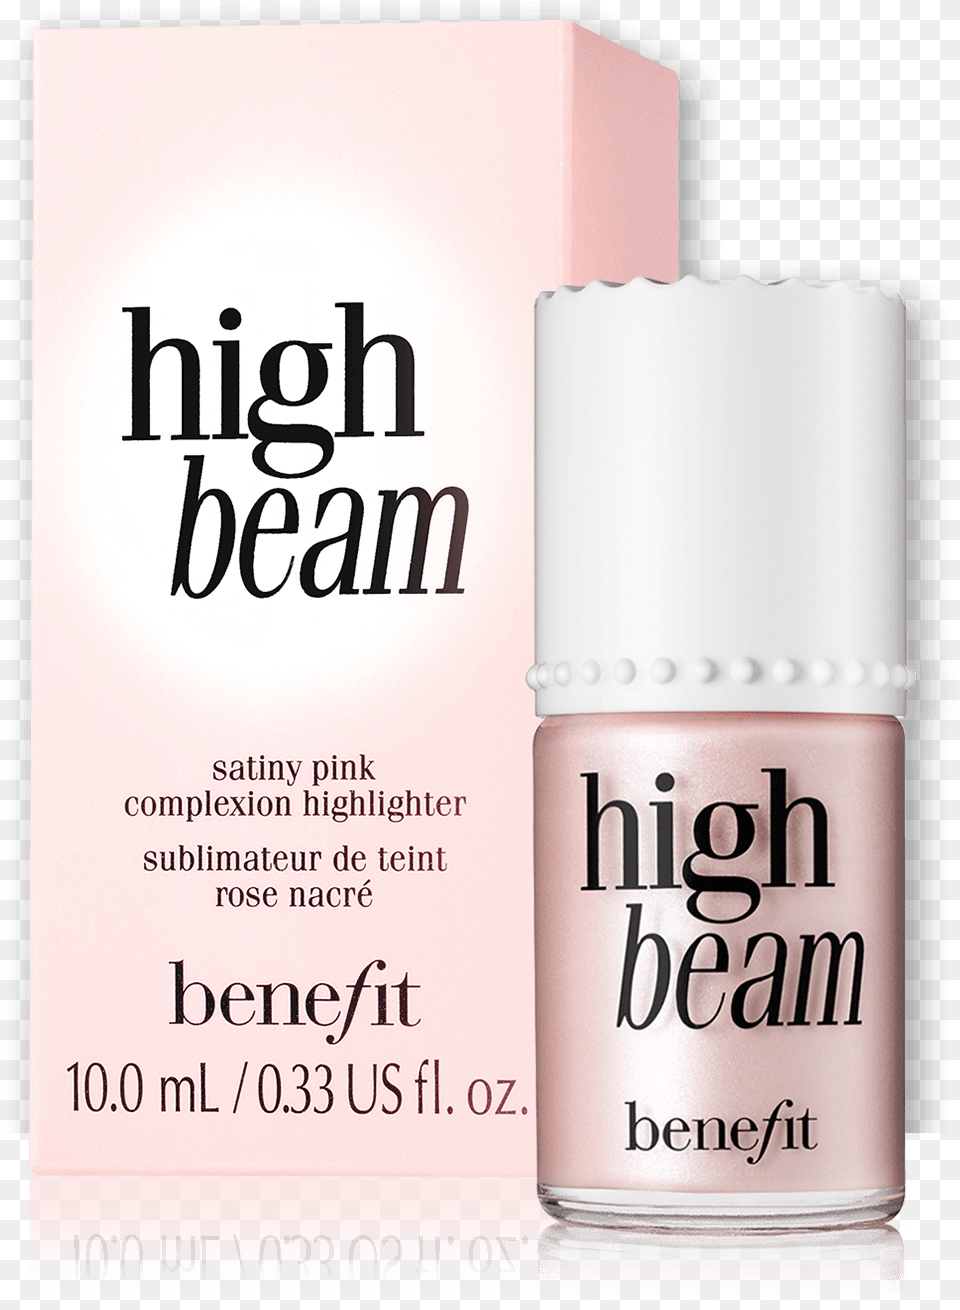 Benefit Dandelion Shy Beam Highlighter Benefit High Beam, Cosmetics, Bottle, Can, Perfume Free Png Download